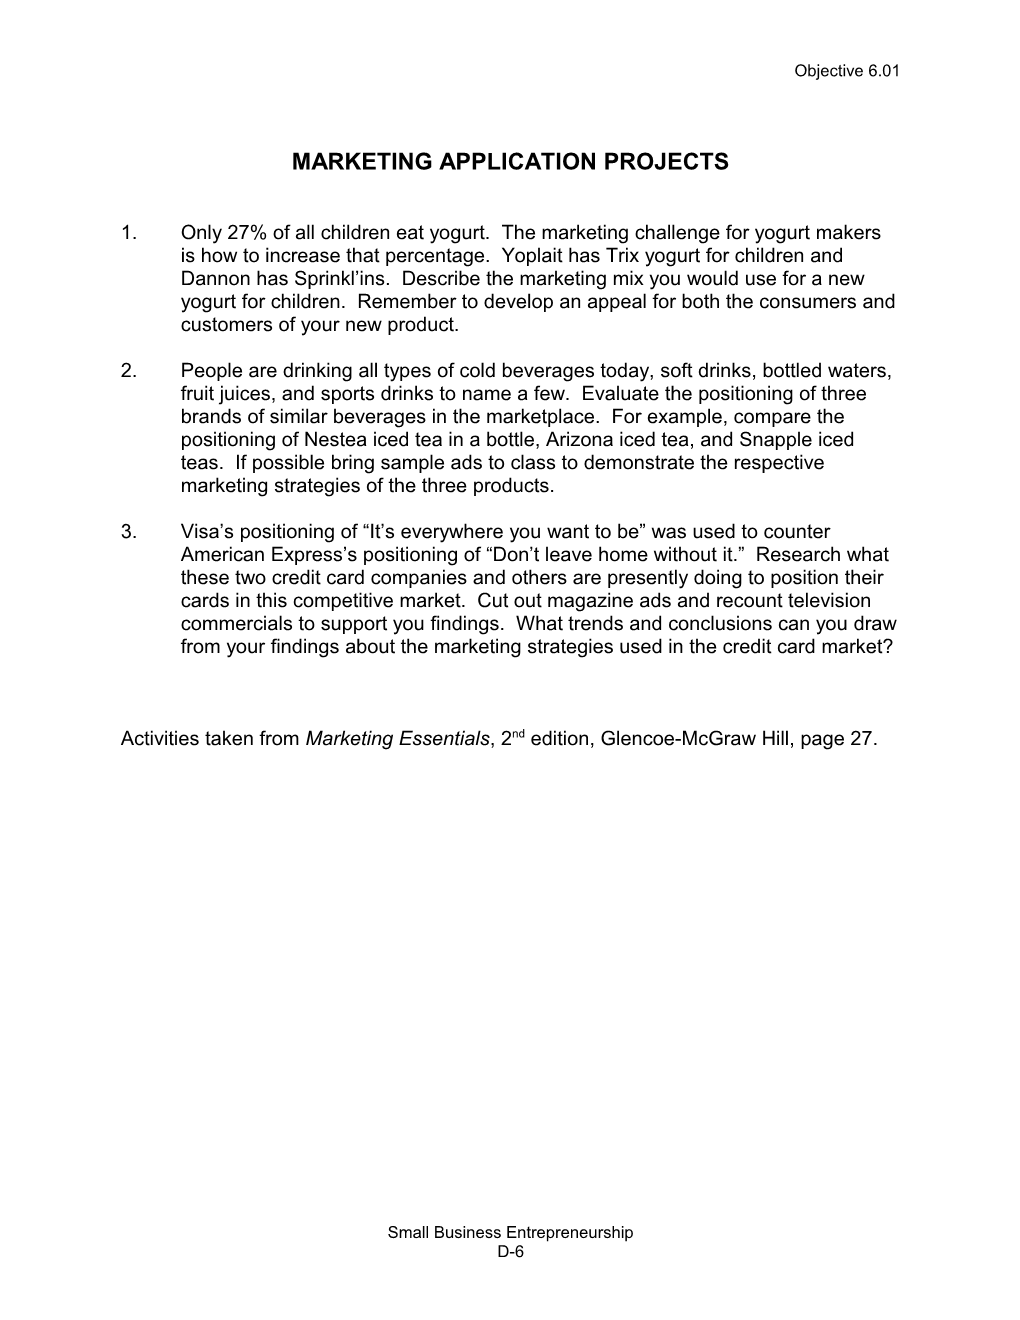 Marketing Application Projects